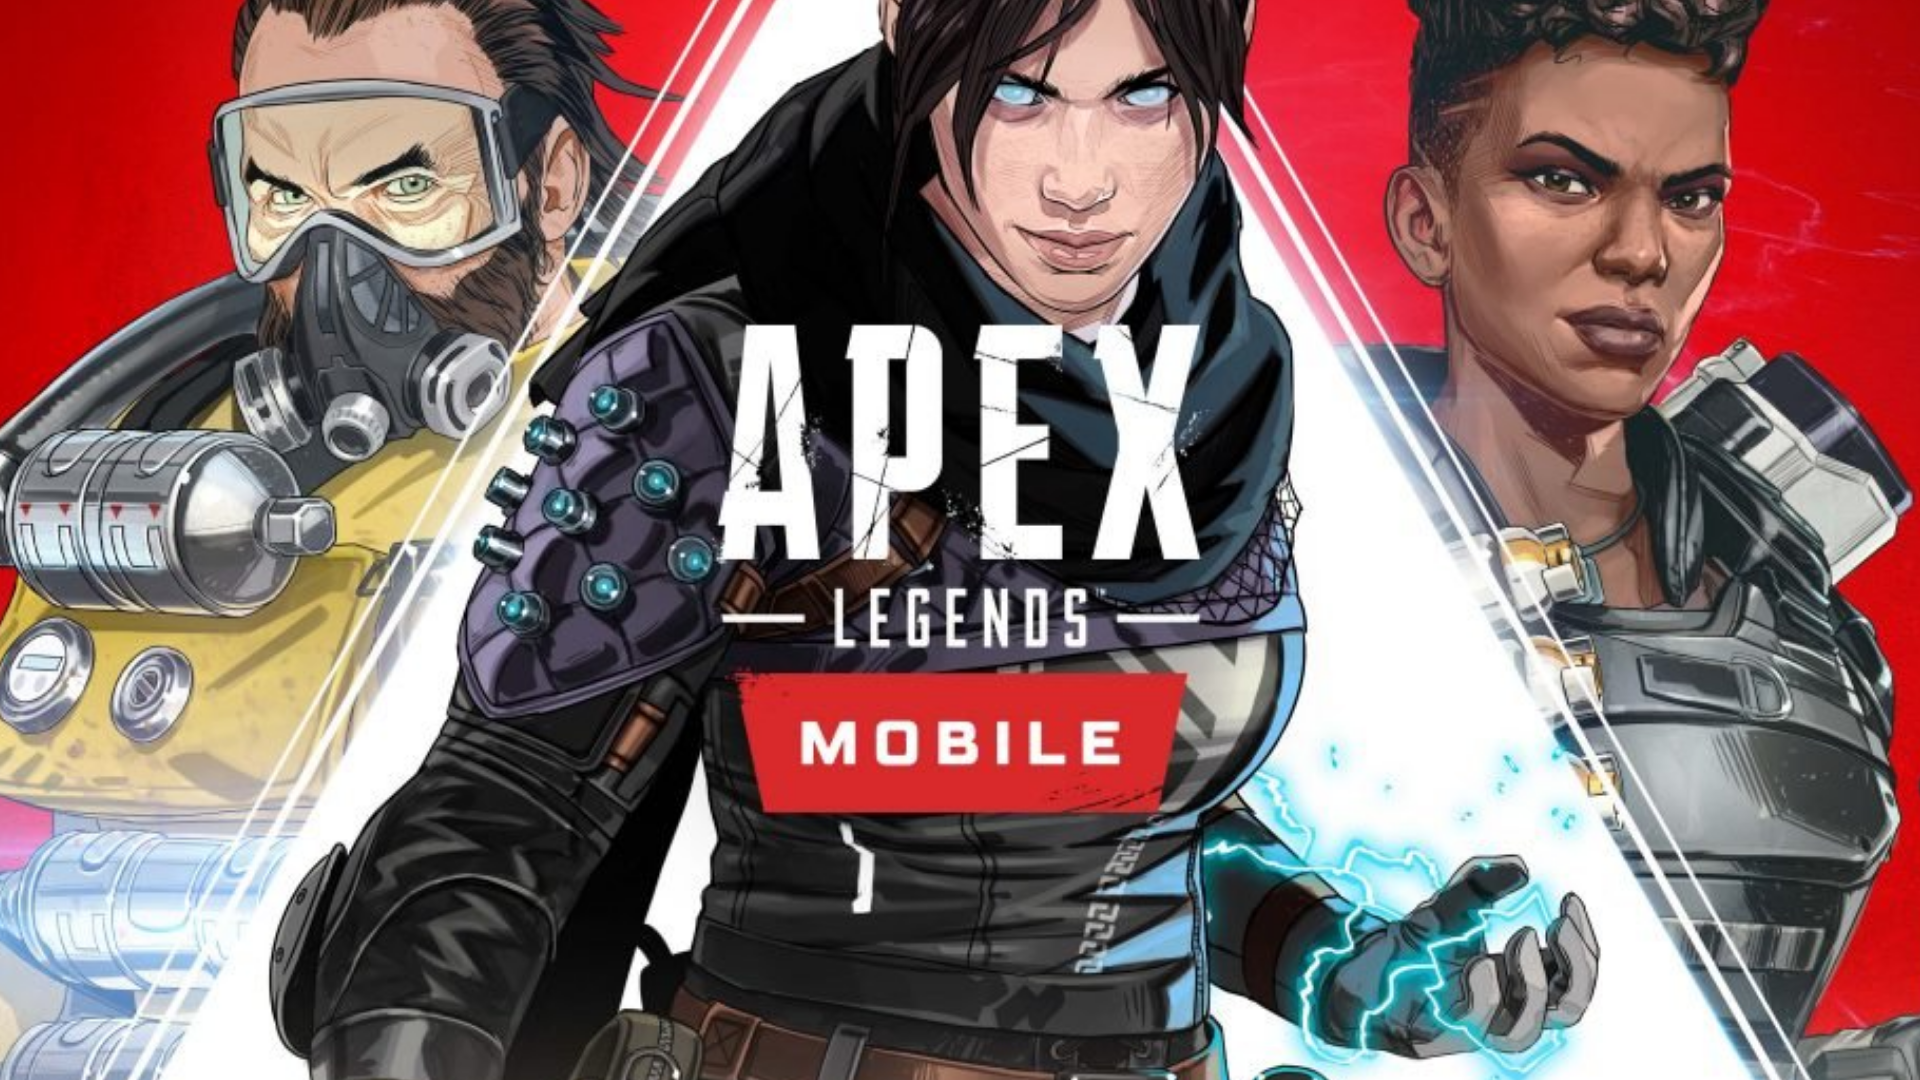 Apex Legends Mobile Release Date Leaked, New Mobile Exclusive Legend, and more